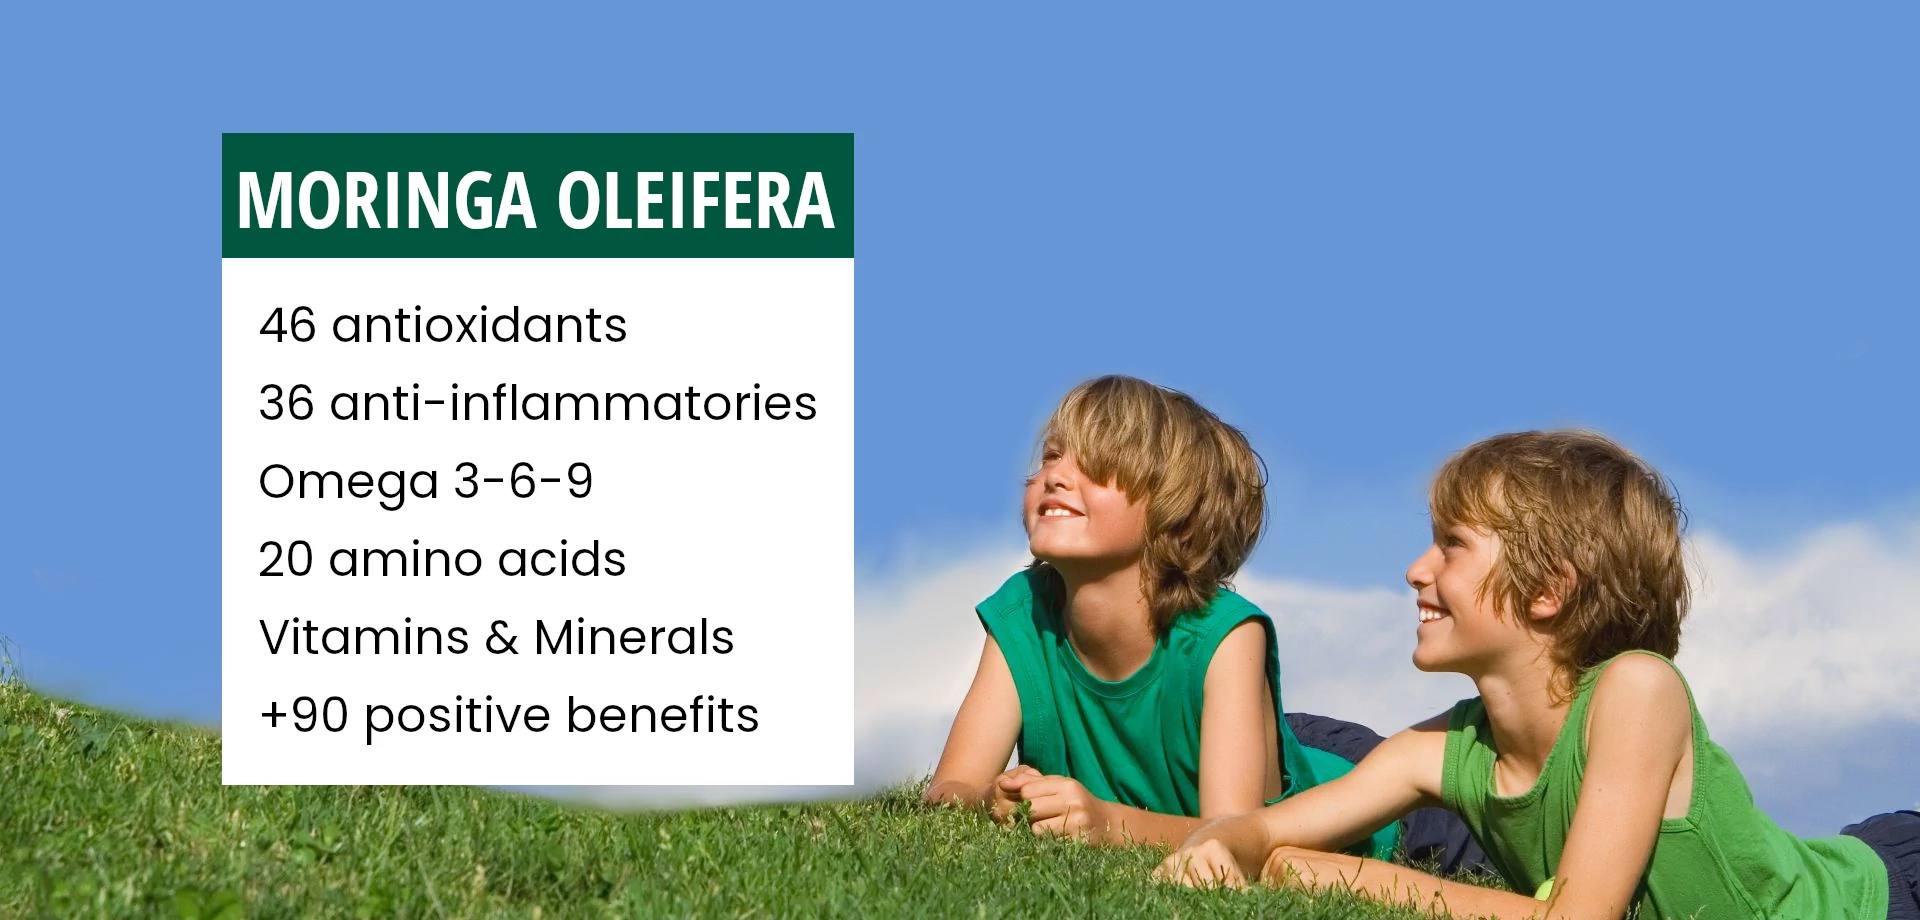 moringa oleifera promotes well being and a healthy body